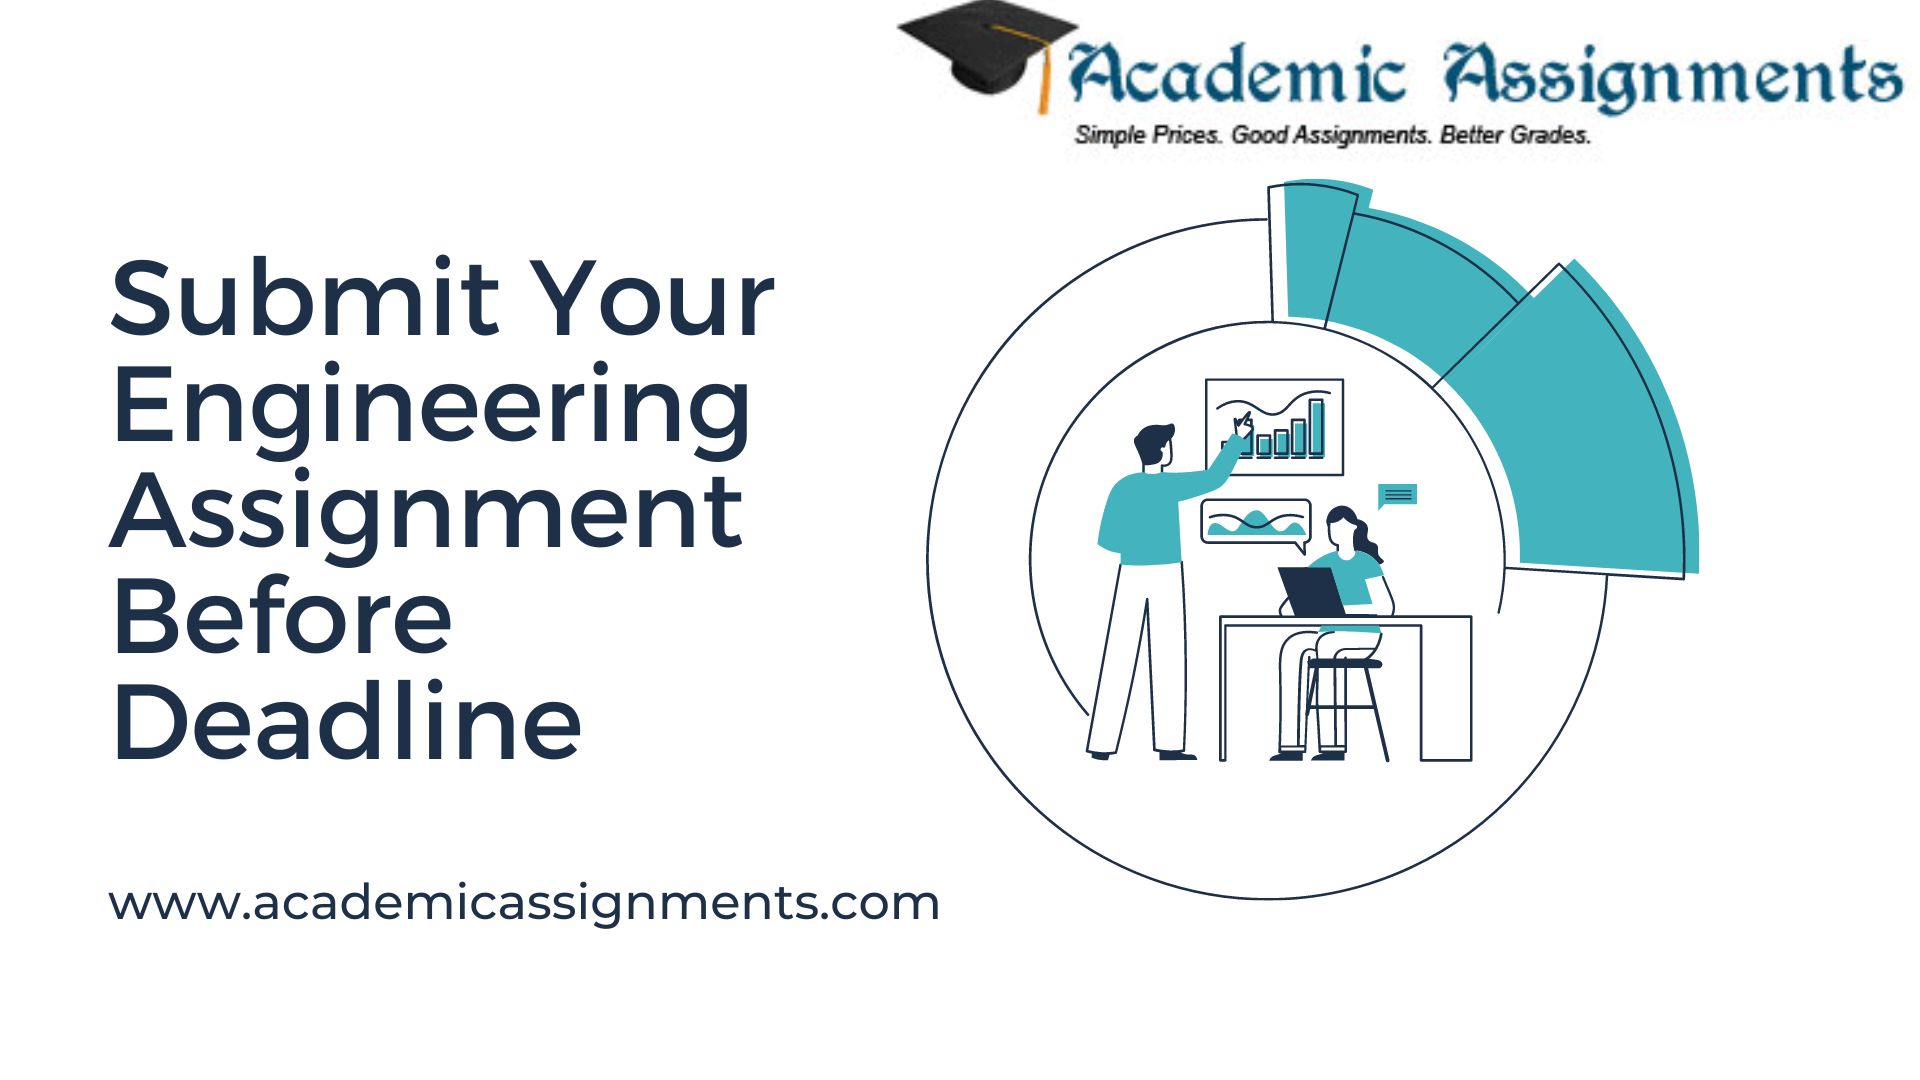 Submit Your Engineering Assignment Before Deadline